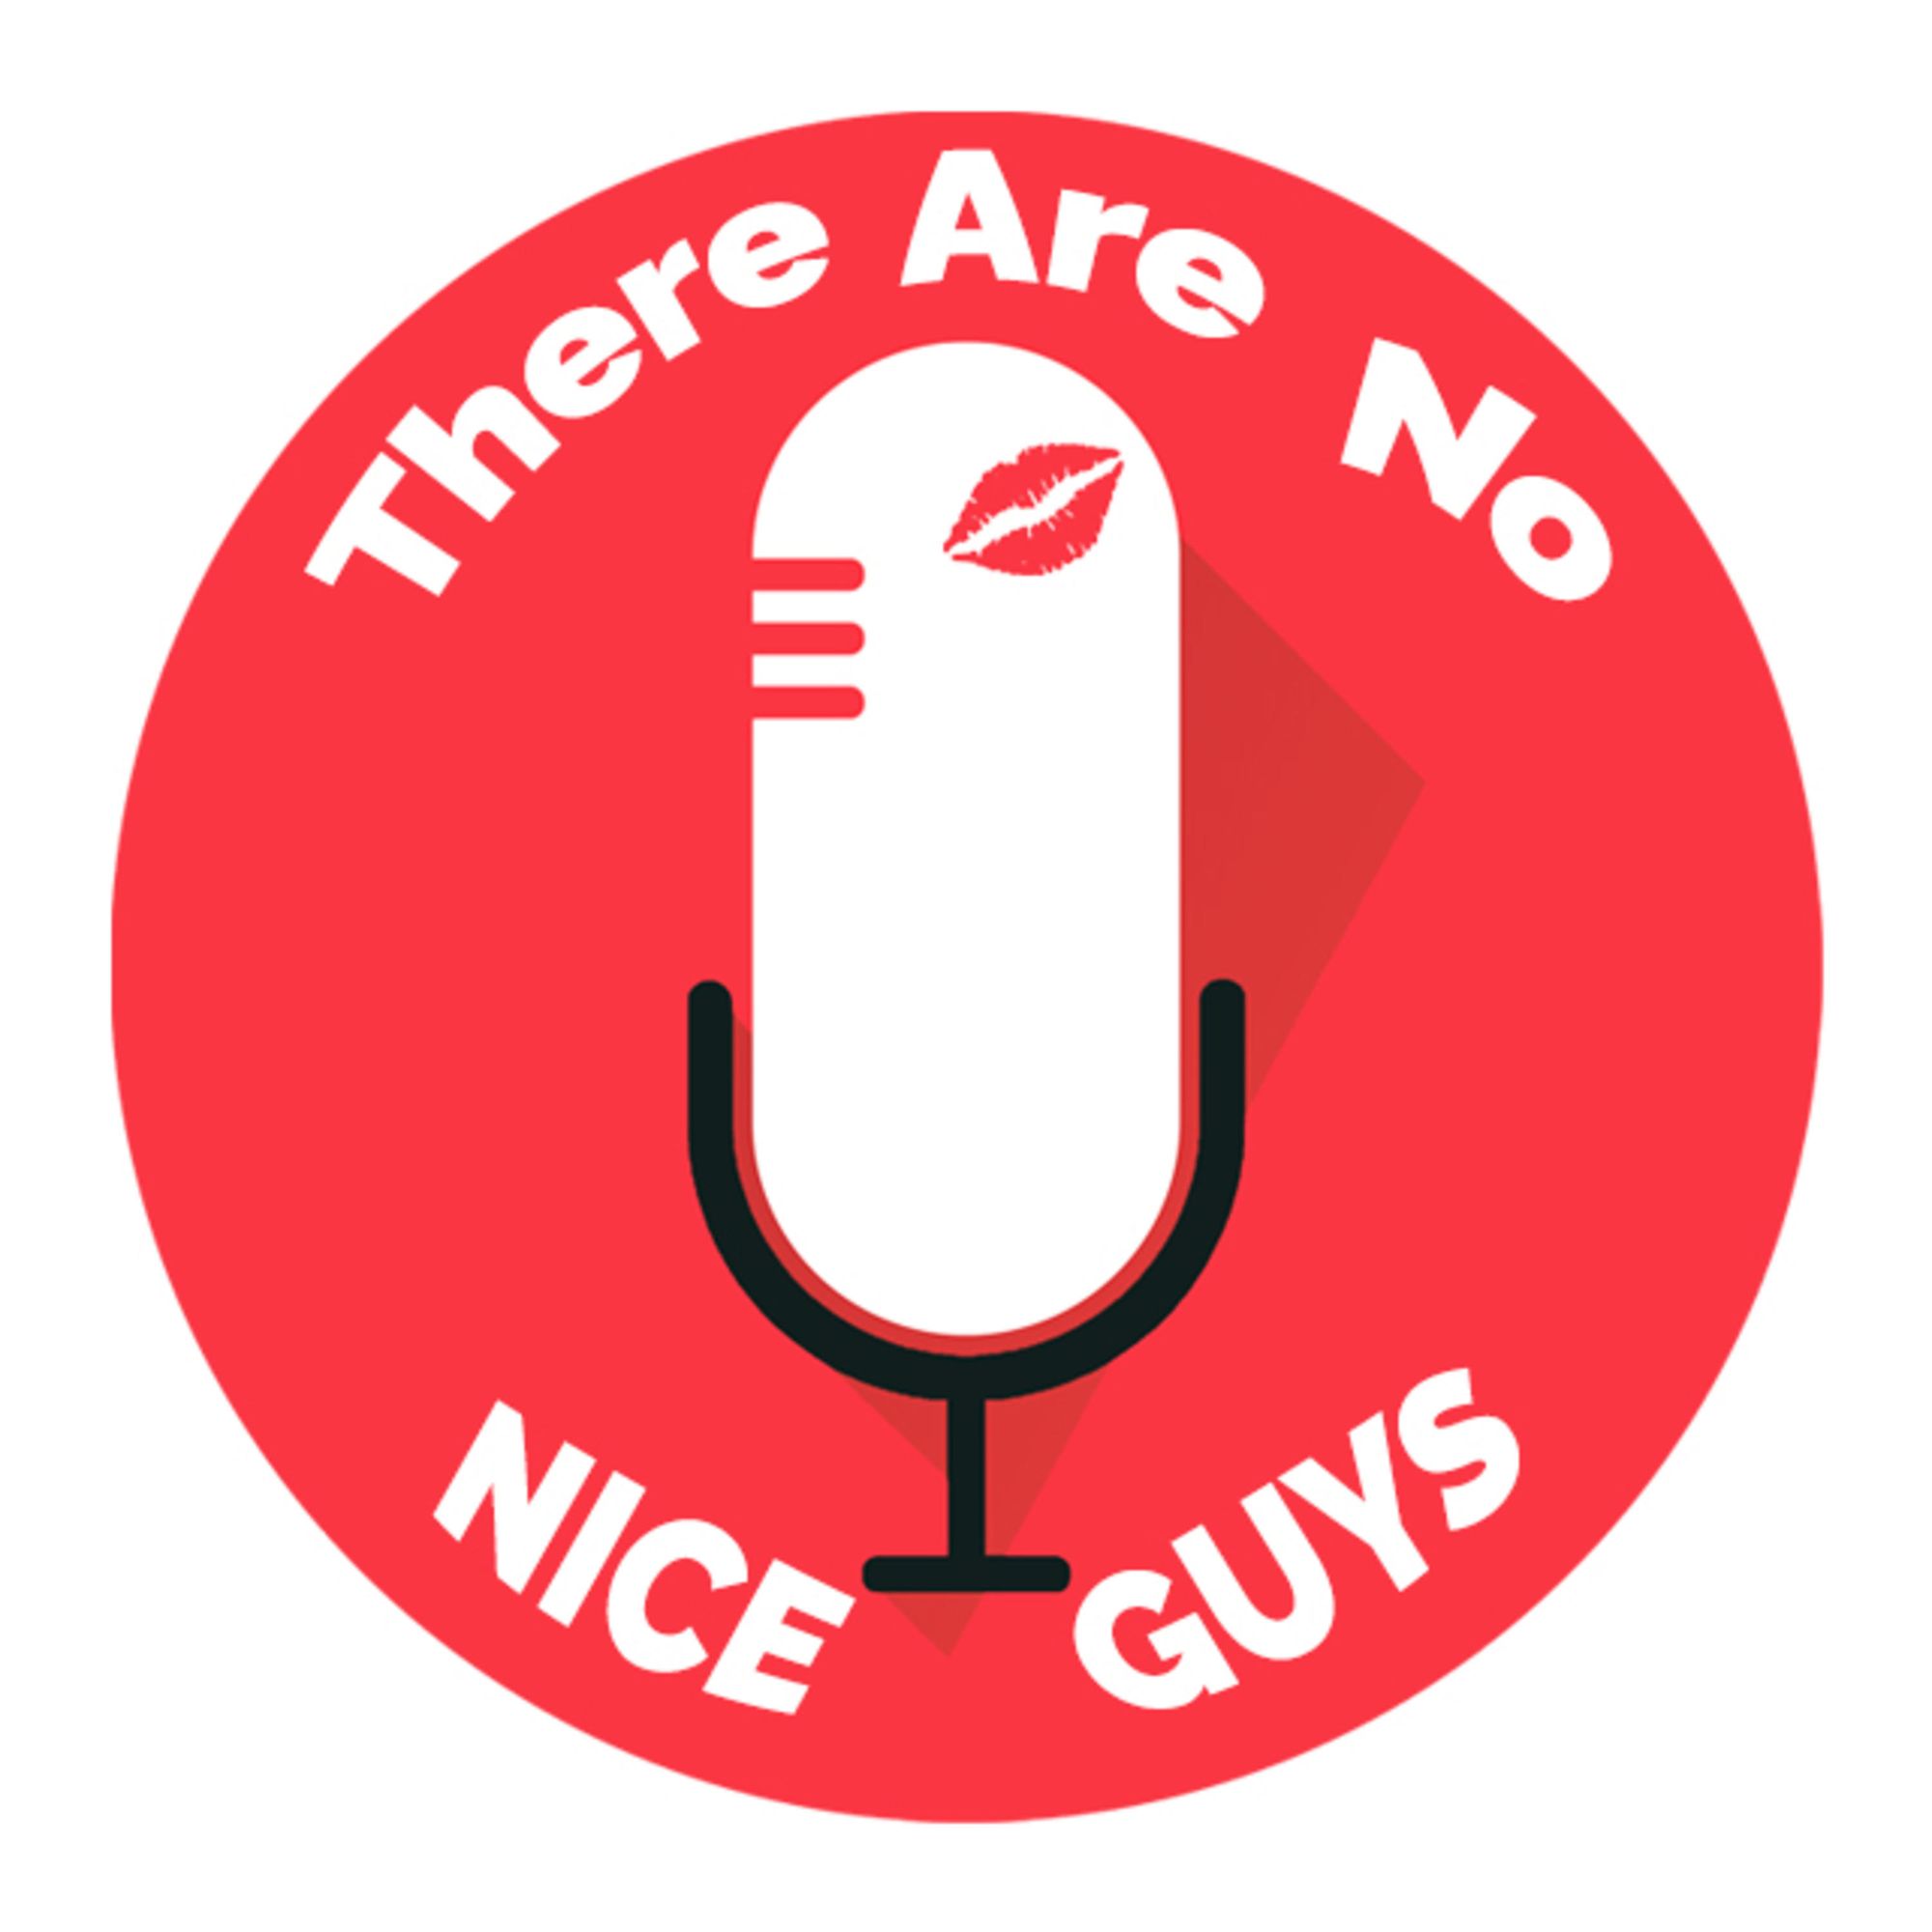 There Are No Nice Guys hosted by Laura Coronado